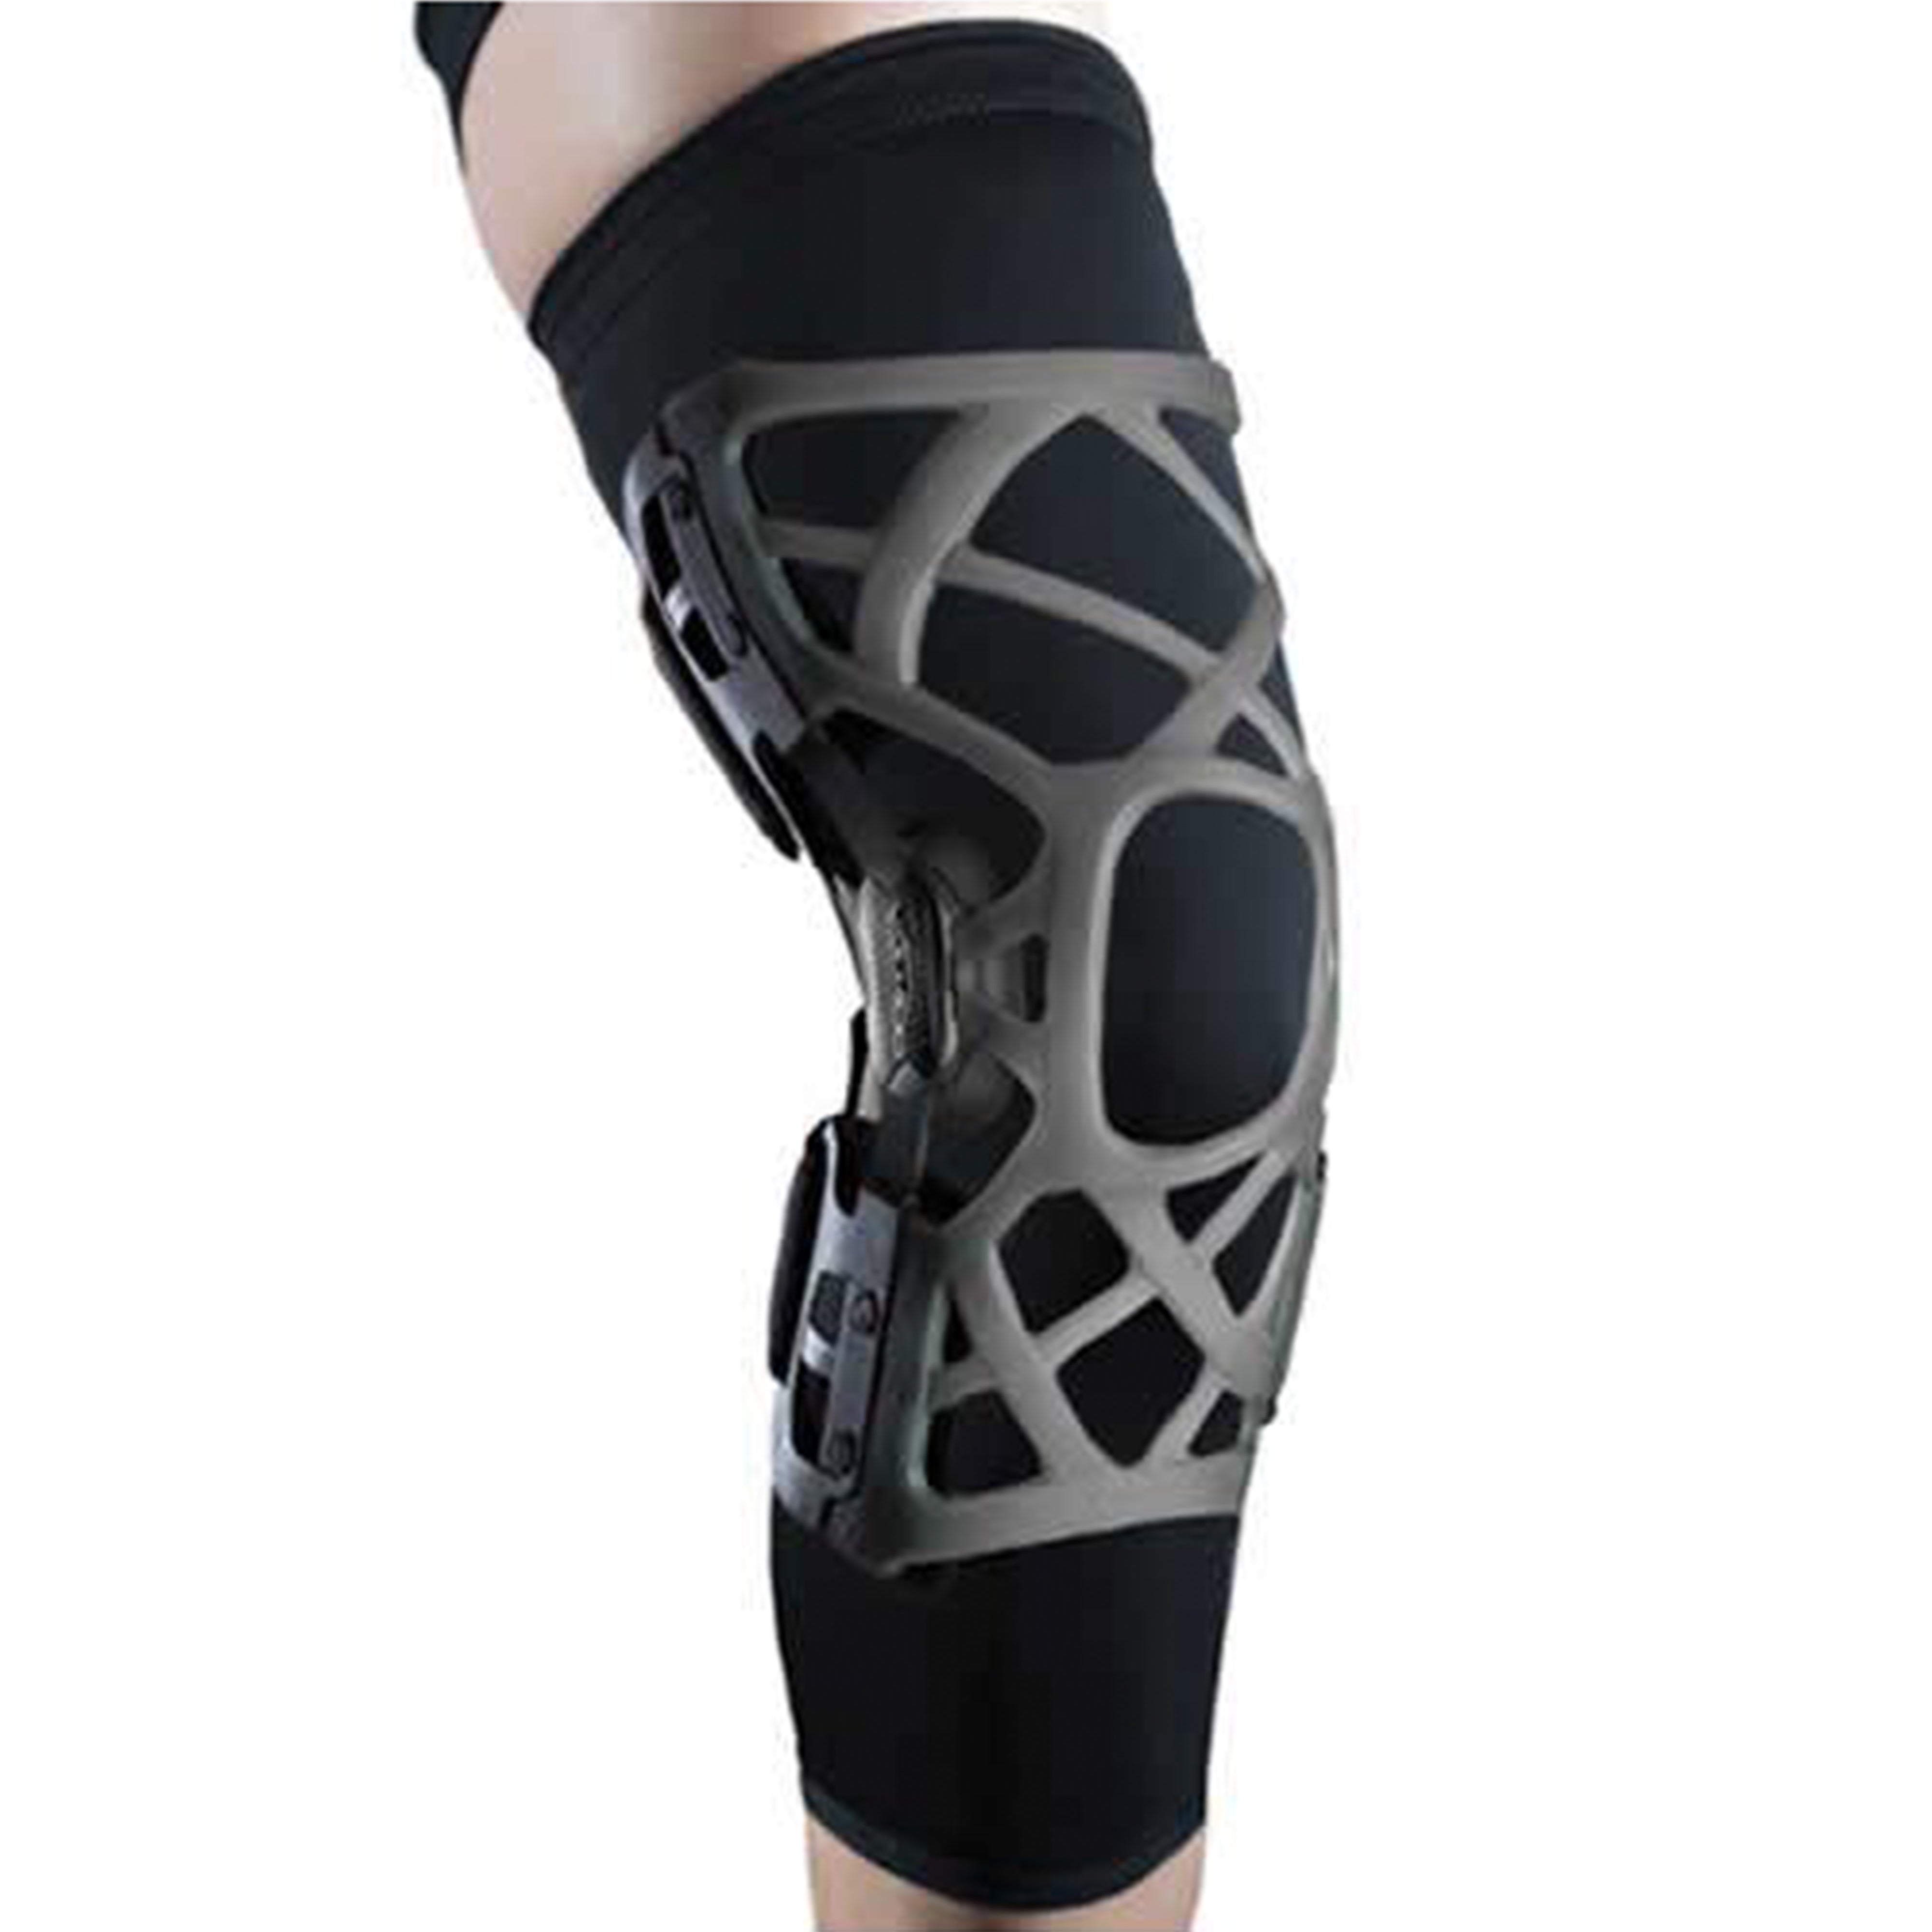 GenuTrain® OA, Supports and orthoses, Medical aids